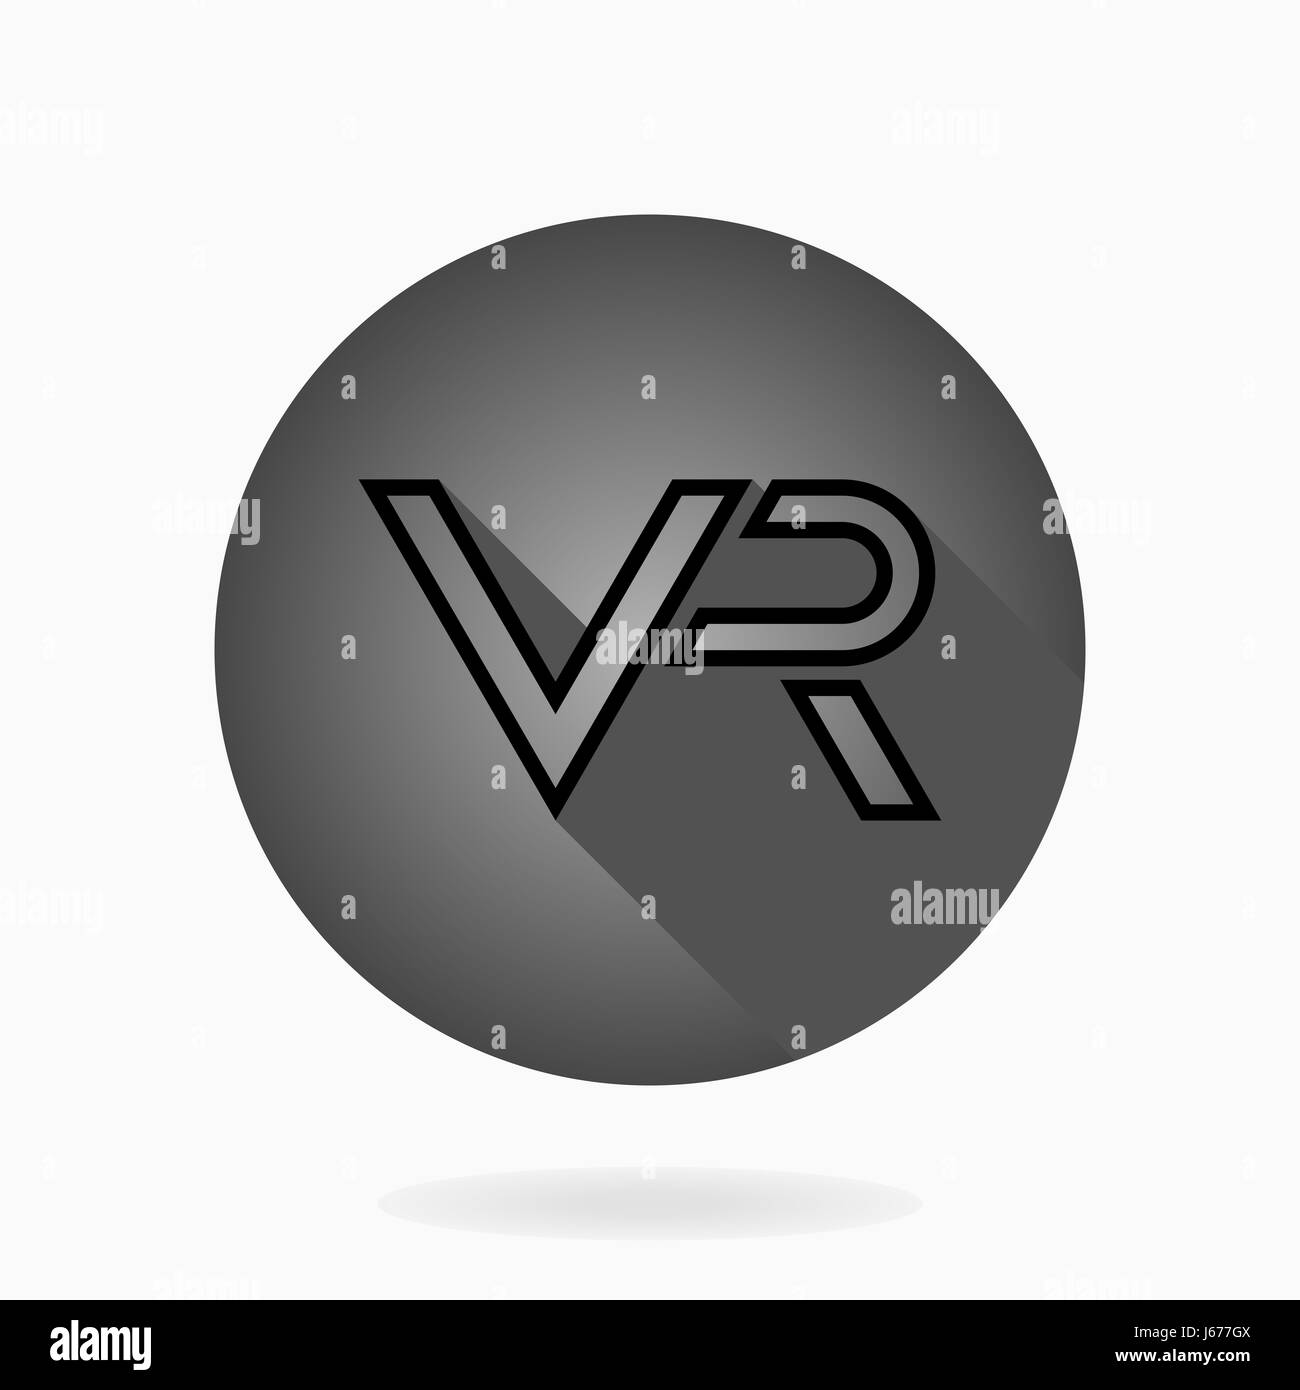 Vr logo Black and White Stock Photos & Images - Alamy